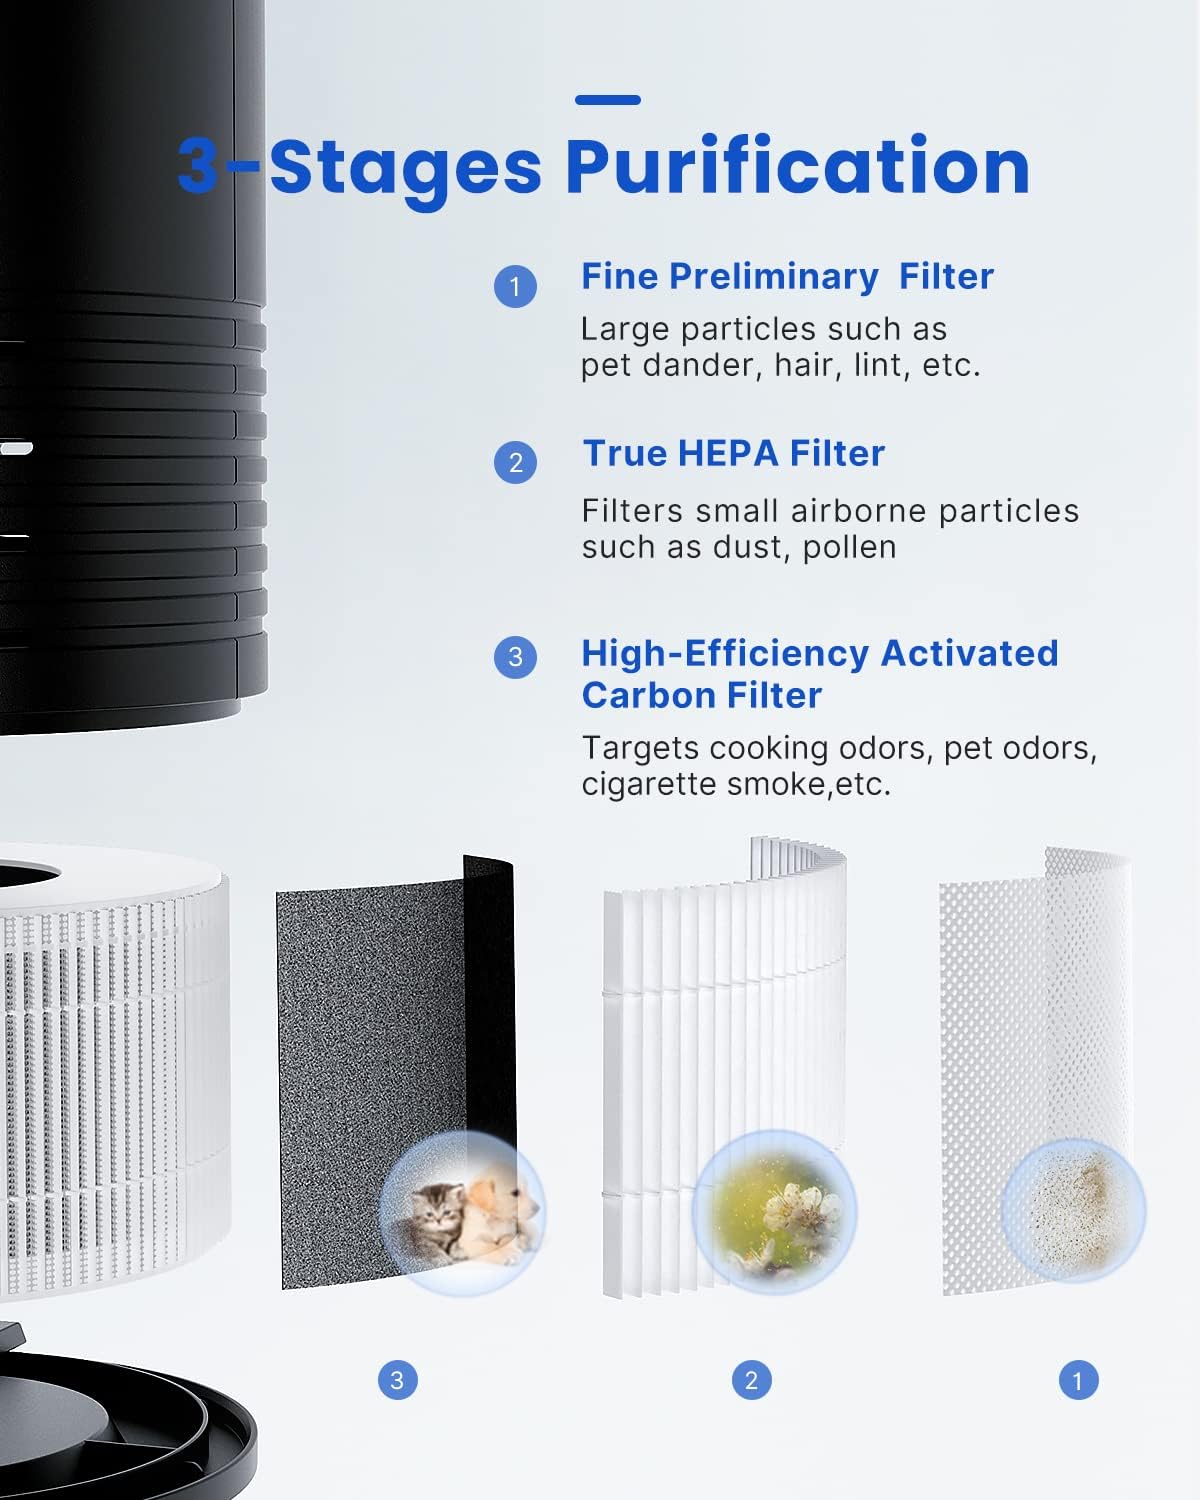 An infographic showcasing the Renpho Compact Air Purifier 068 Ozone Free. It lists: 1) preliminary filter for large particles, illustrated with fiber mesh and lint, 2) true HEPA filter for airborne contaminants.